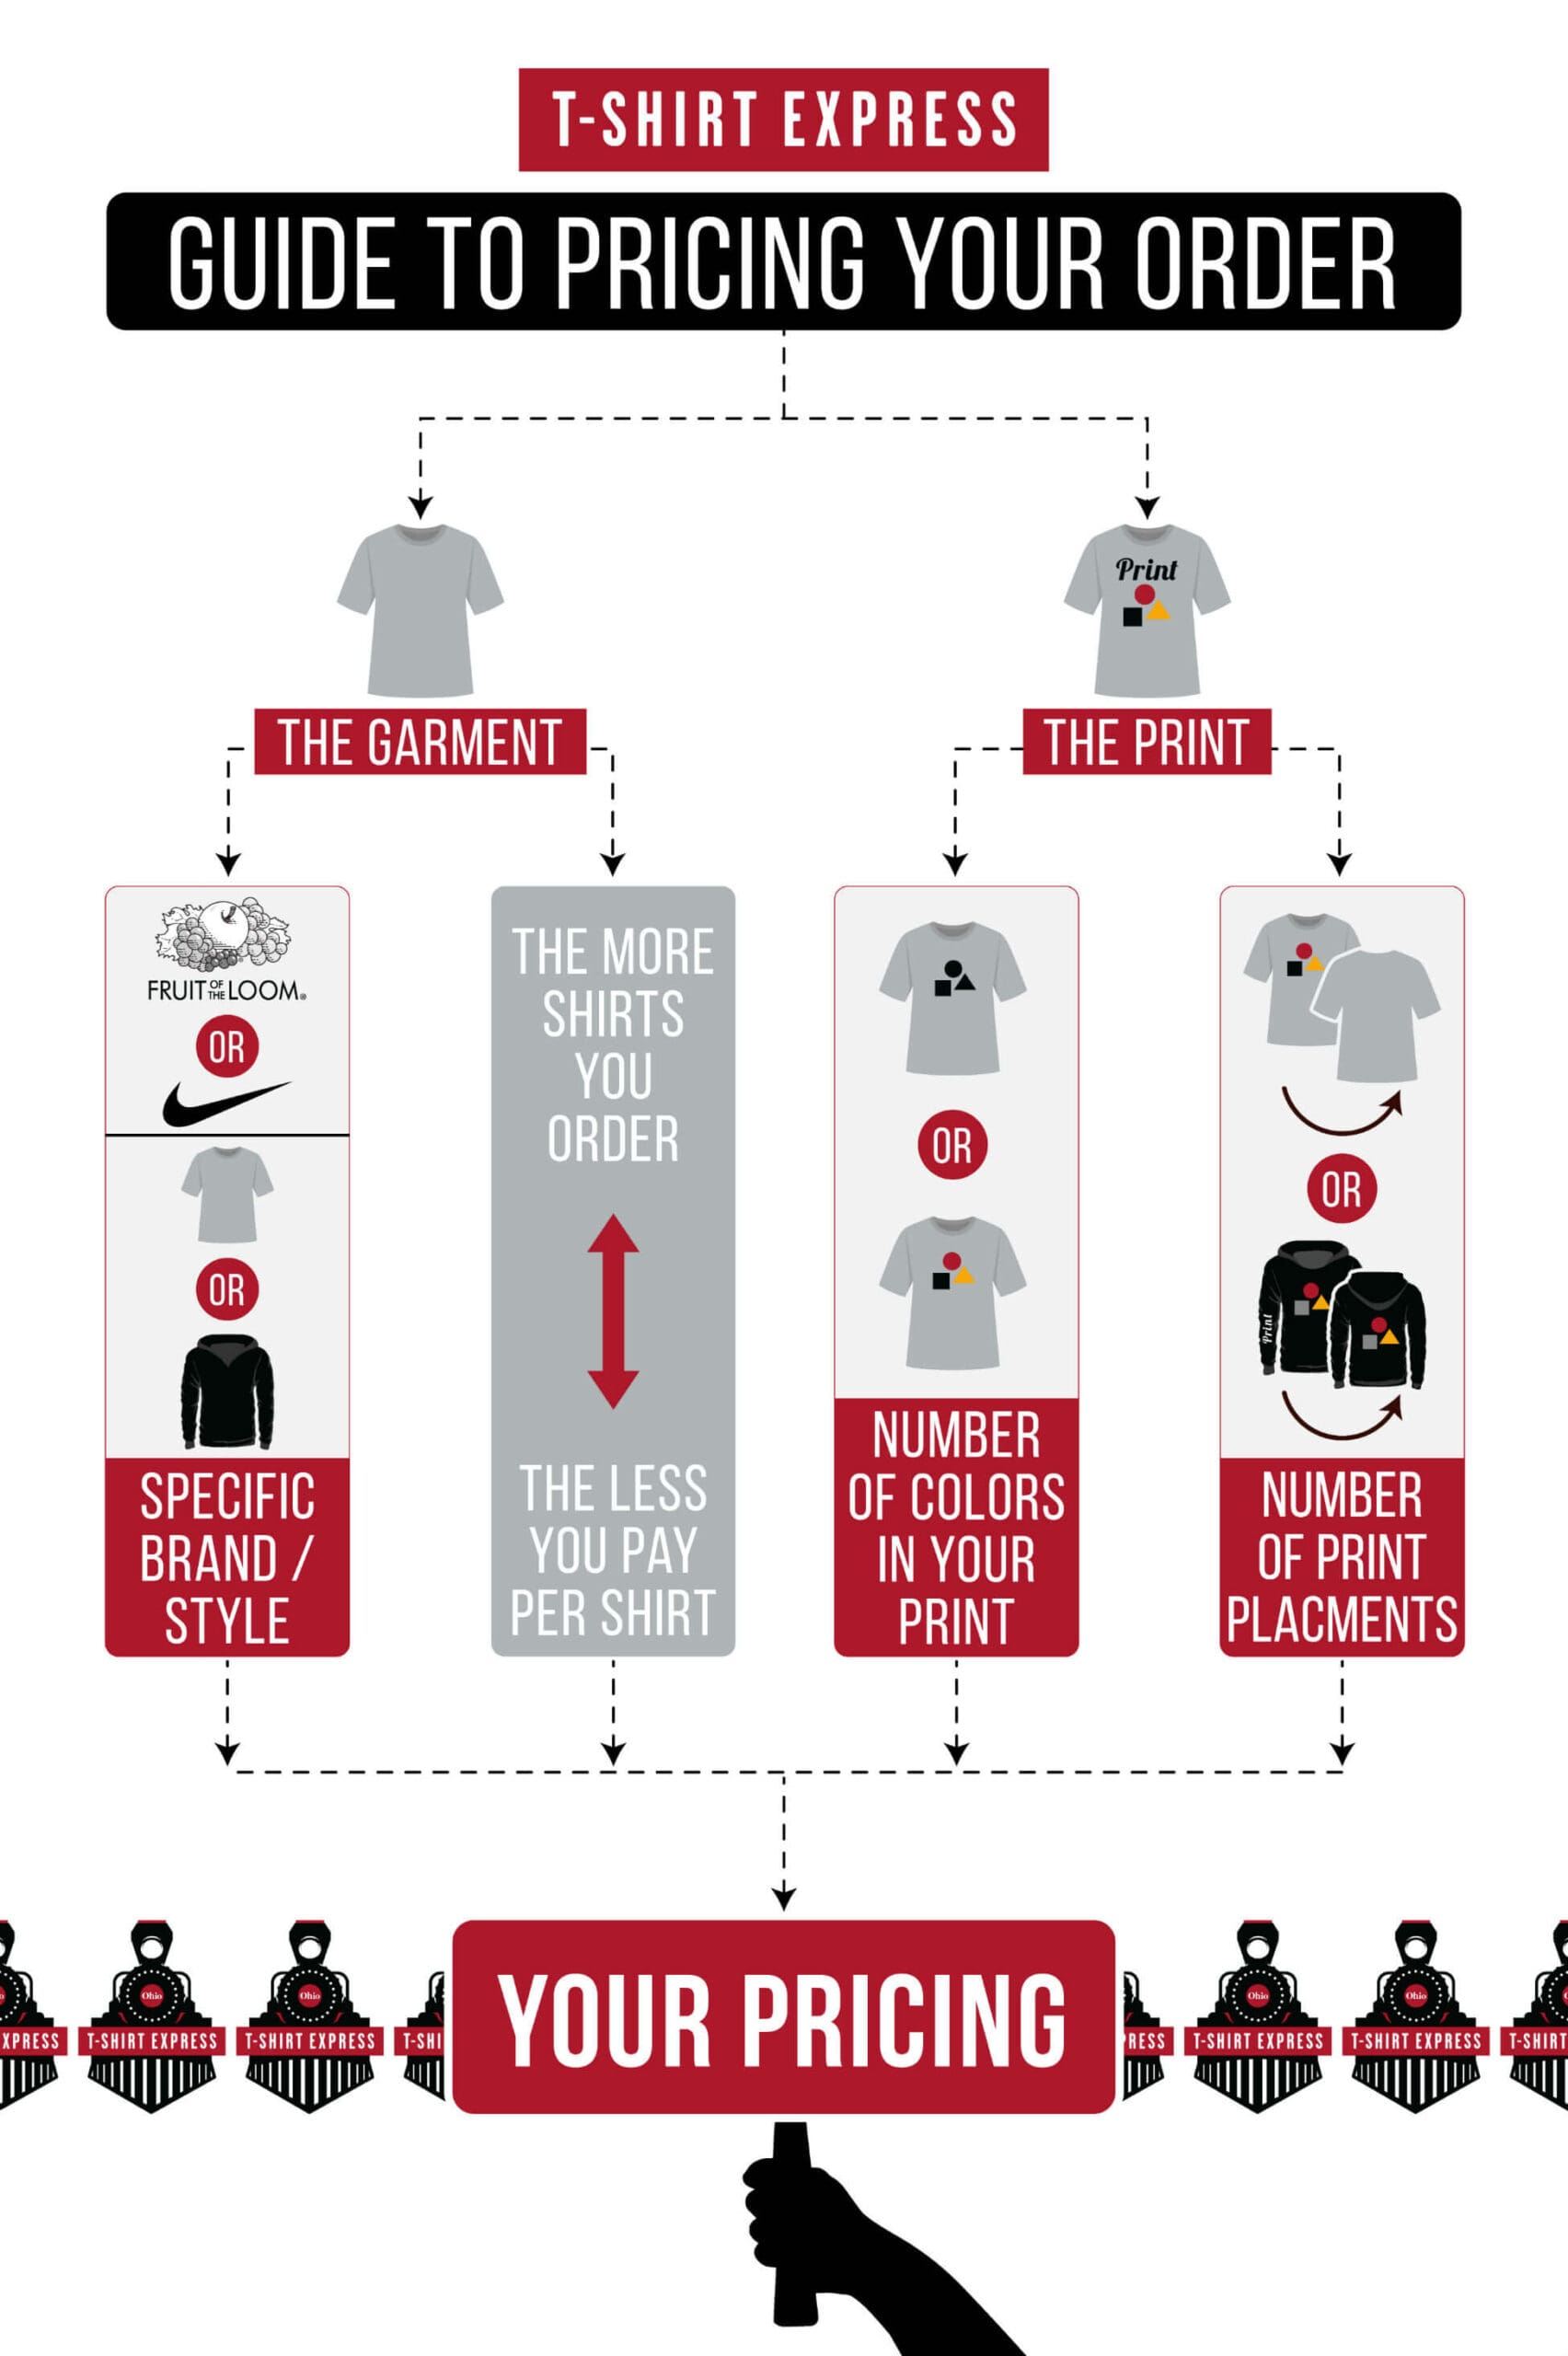 t-shirt express guide to pricing for Five Corners